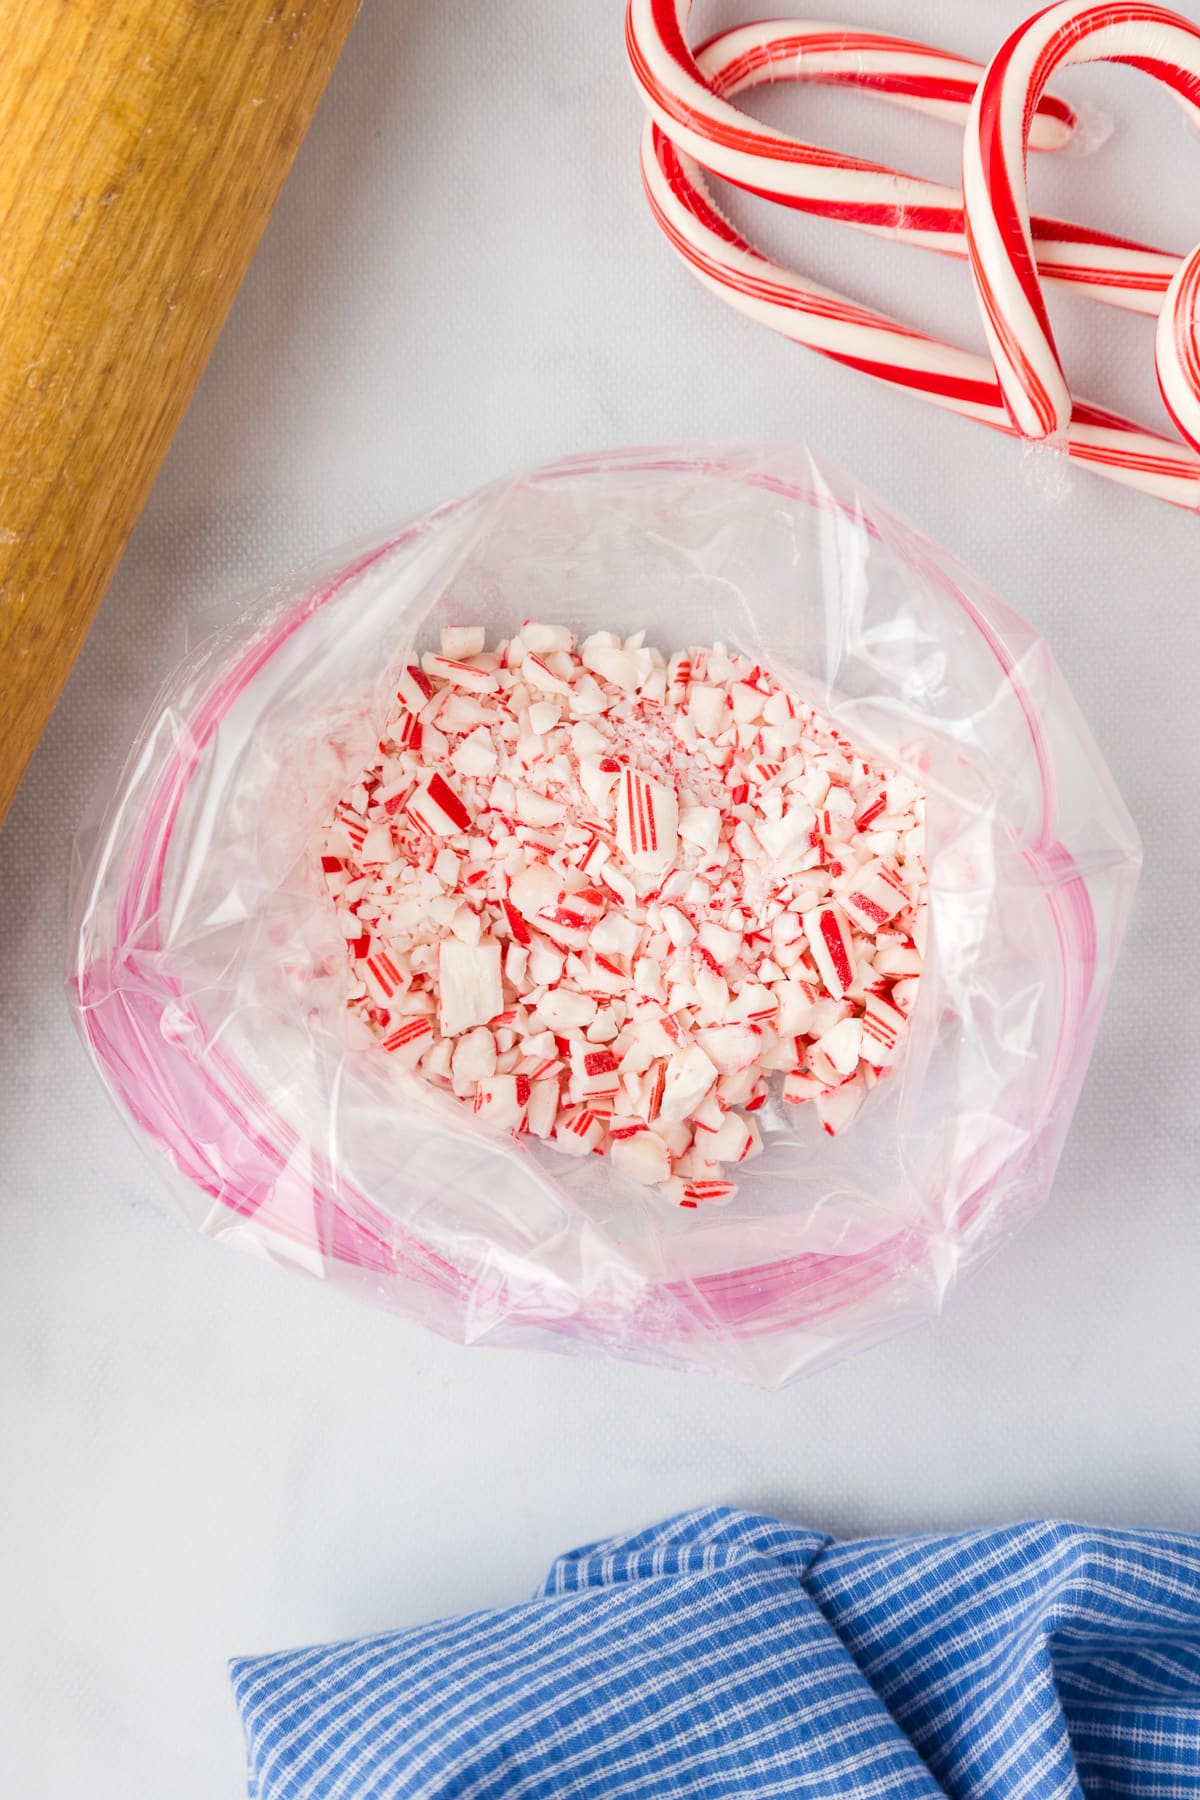 Candy canes in a plastic bag next to a rolling pin.